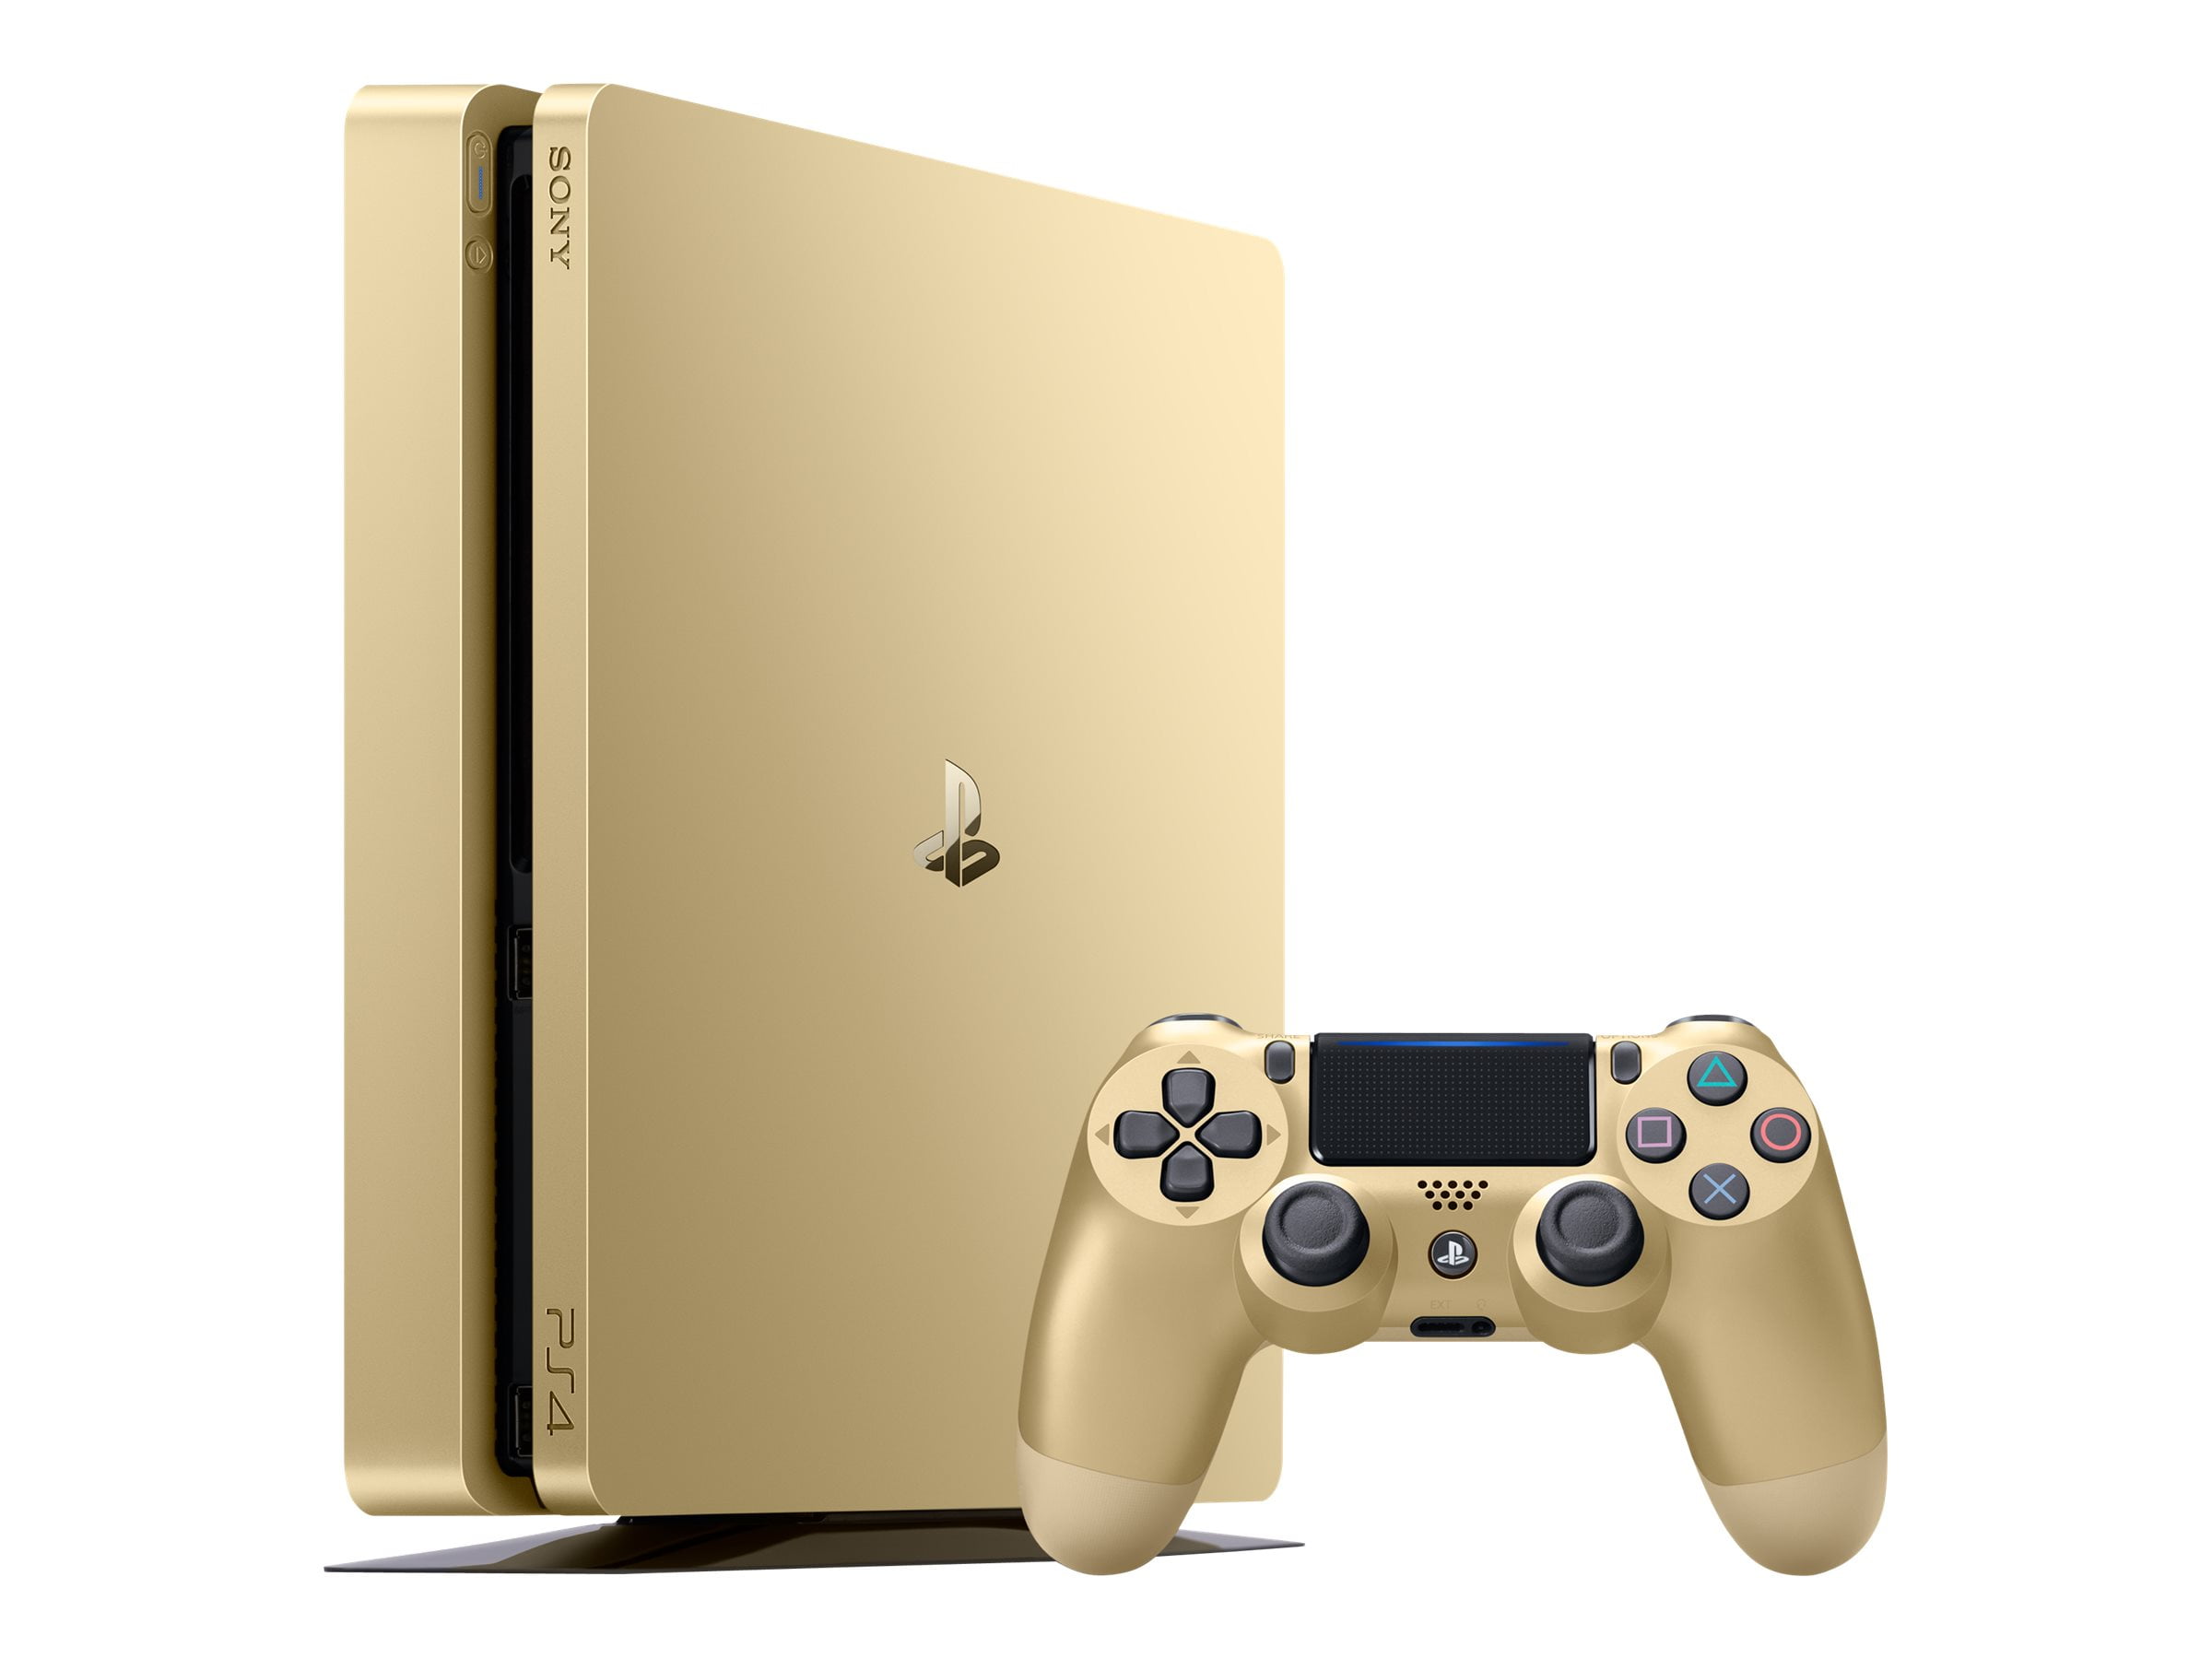 Relaterede Foran suppe Sony PlayStation 4 - Limited Edition - game console - HDR - 1 TB HDD - gold  - Walmart.com